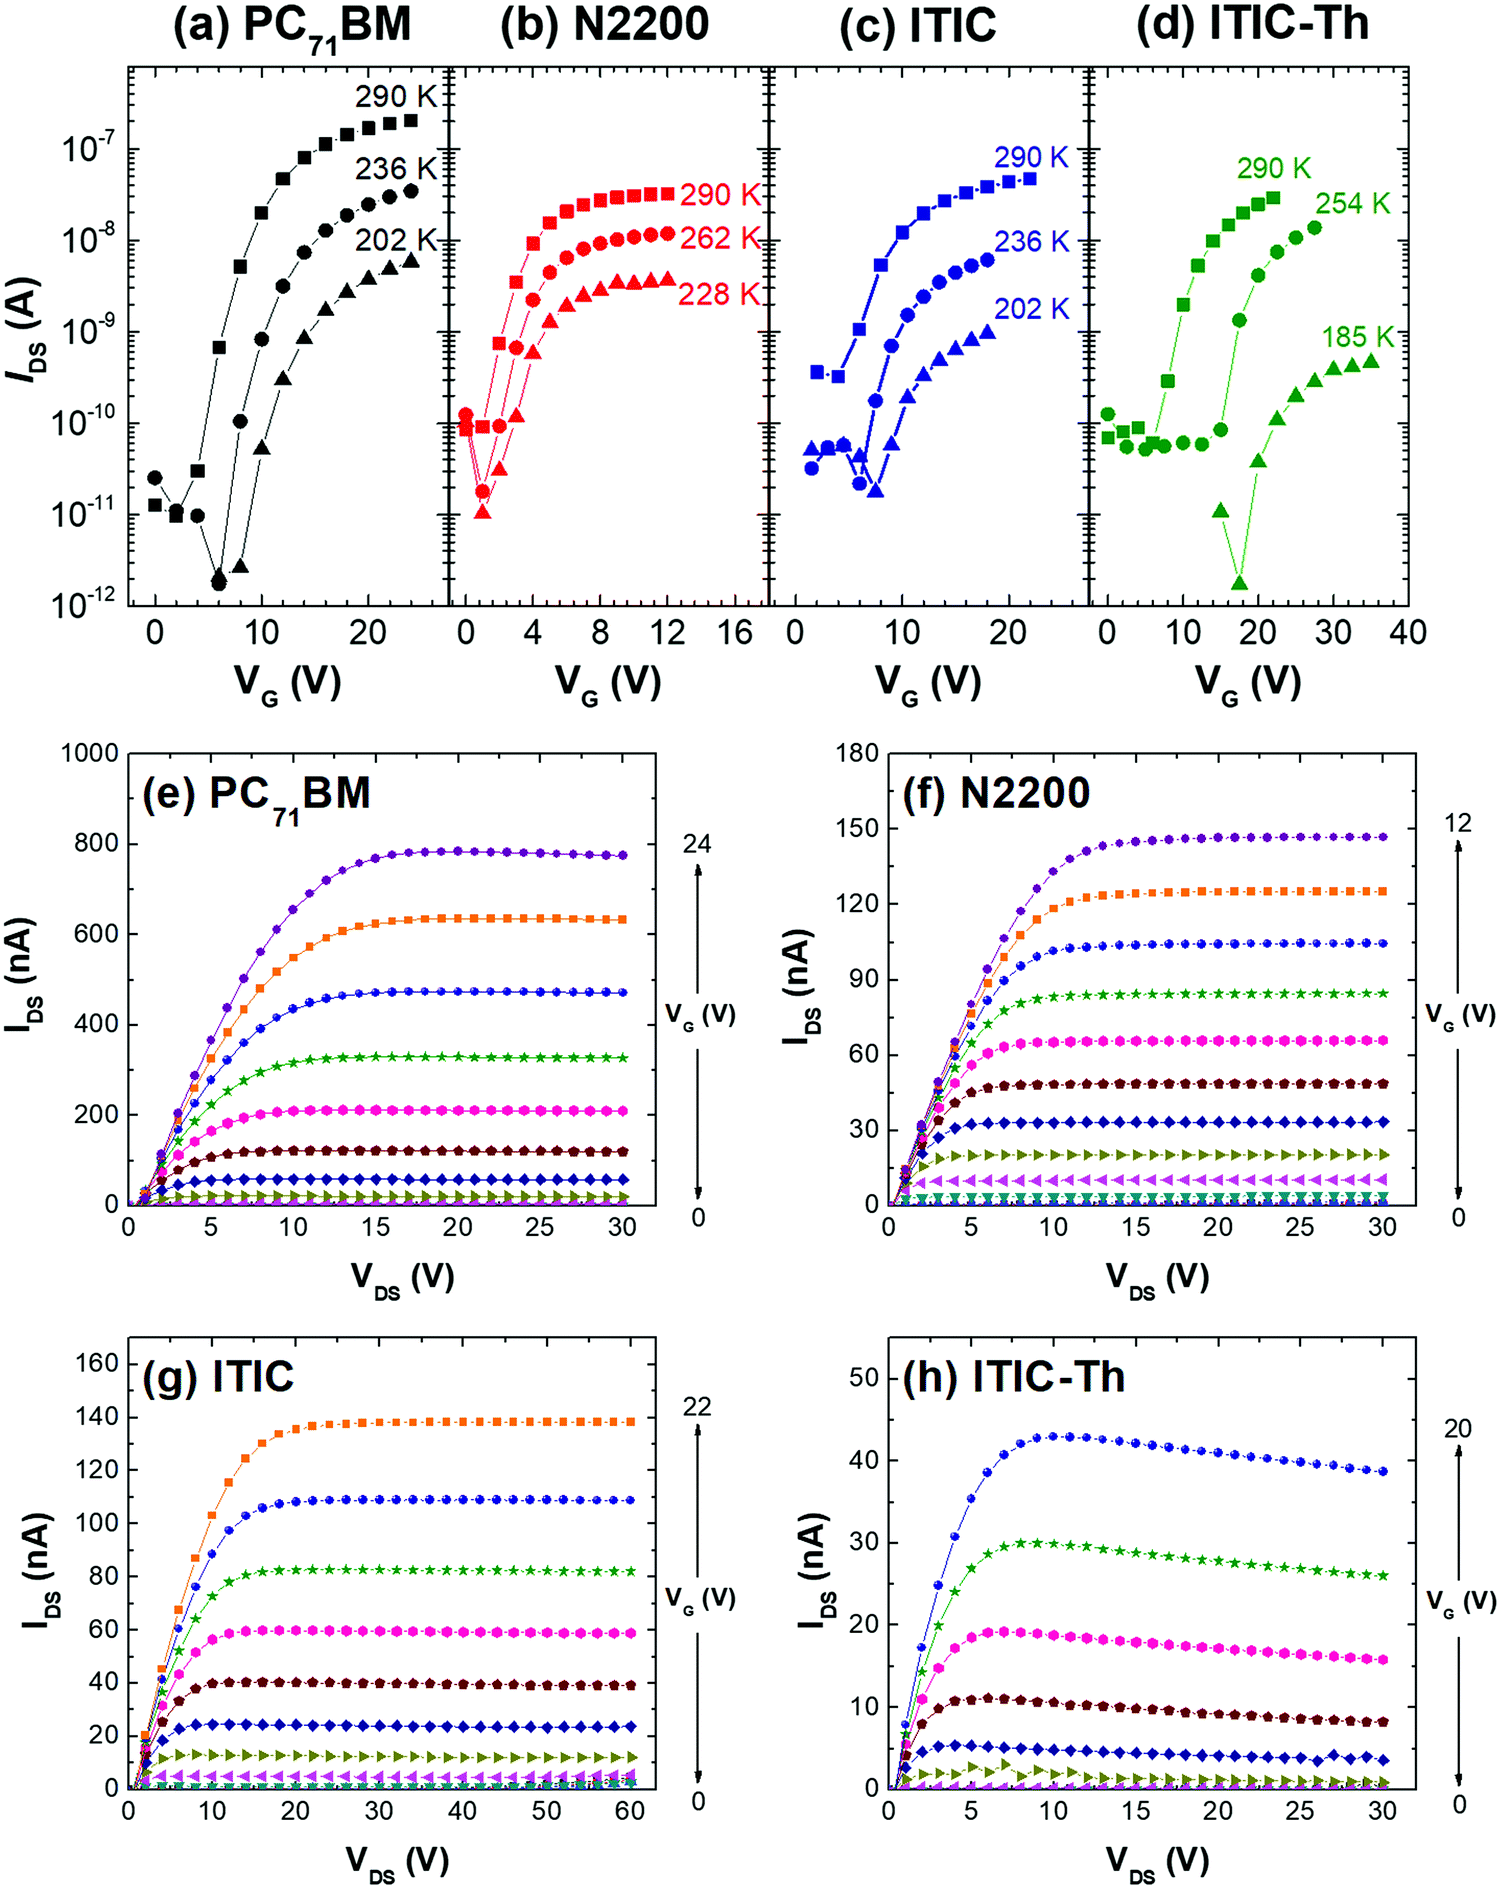 A Facile And Robust Approach To Prepare Fluorinated Polymer Dielectrics For Probing The Intrinsic Transport Behavior Of Organic Semiconductors Materials Advances Rsc Publishing Doi 10 1039 D0maa